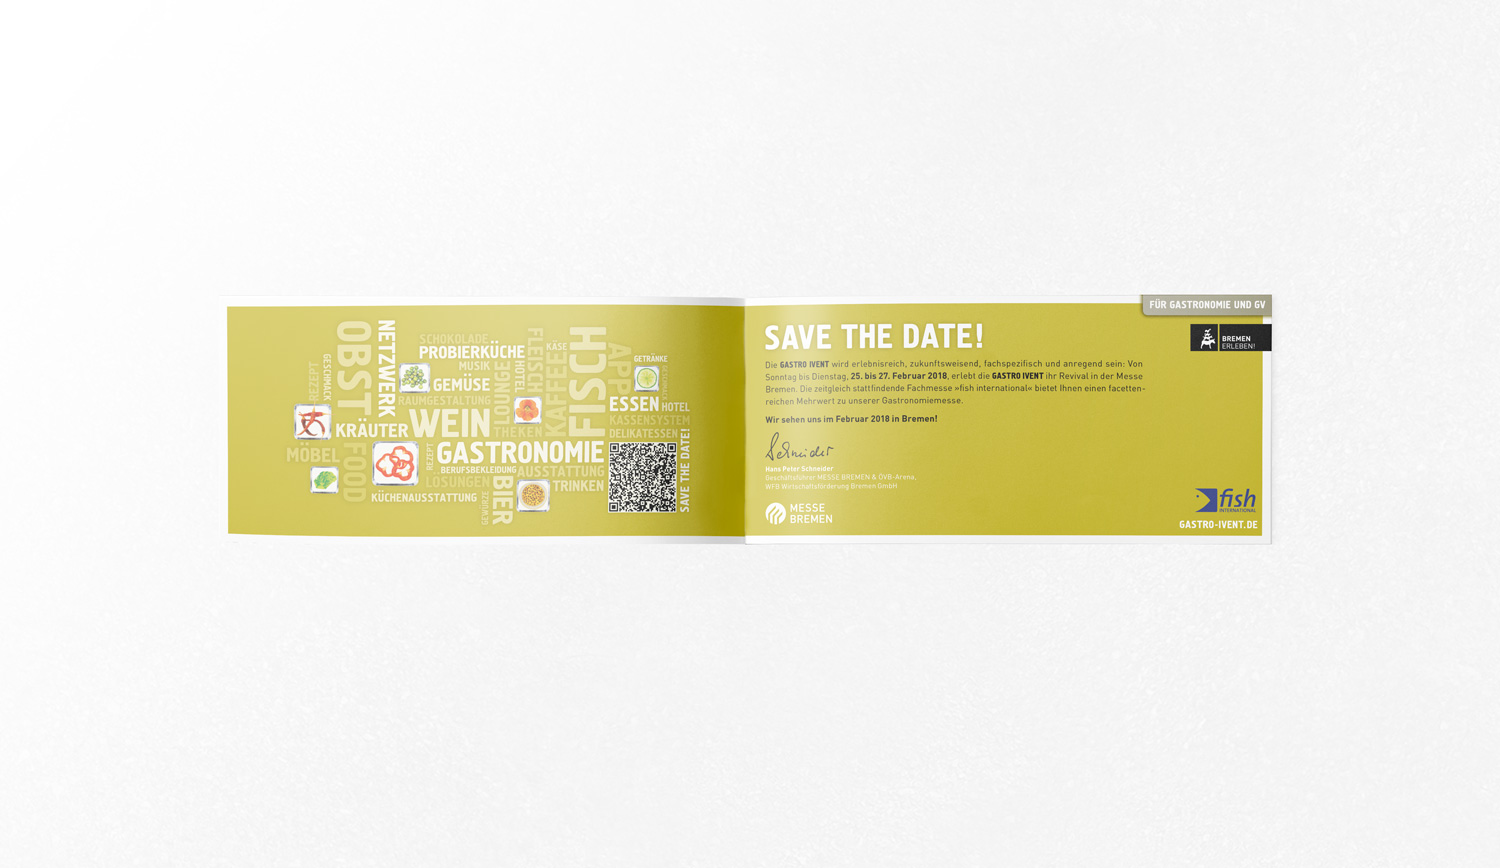 102_gastro_ivent_save_the_date